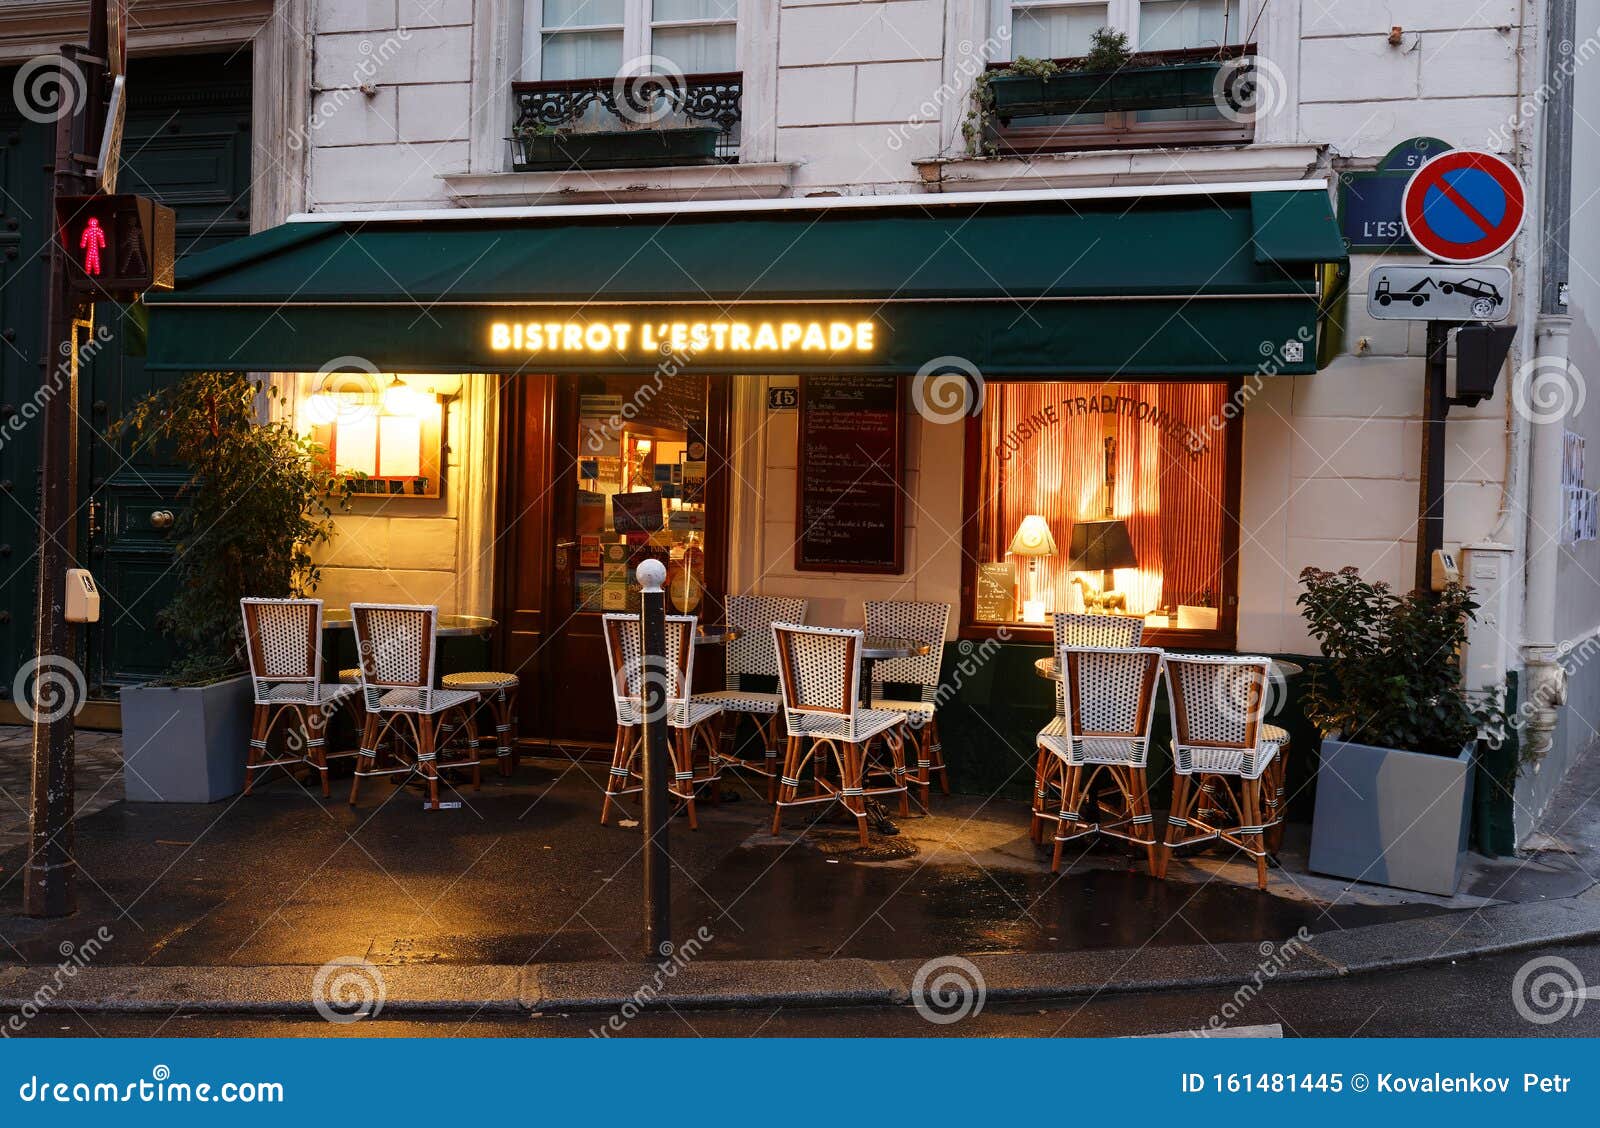 Bistrot Estrapade is Famous Traditional French Restaurant Located Near ...